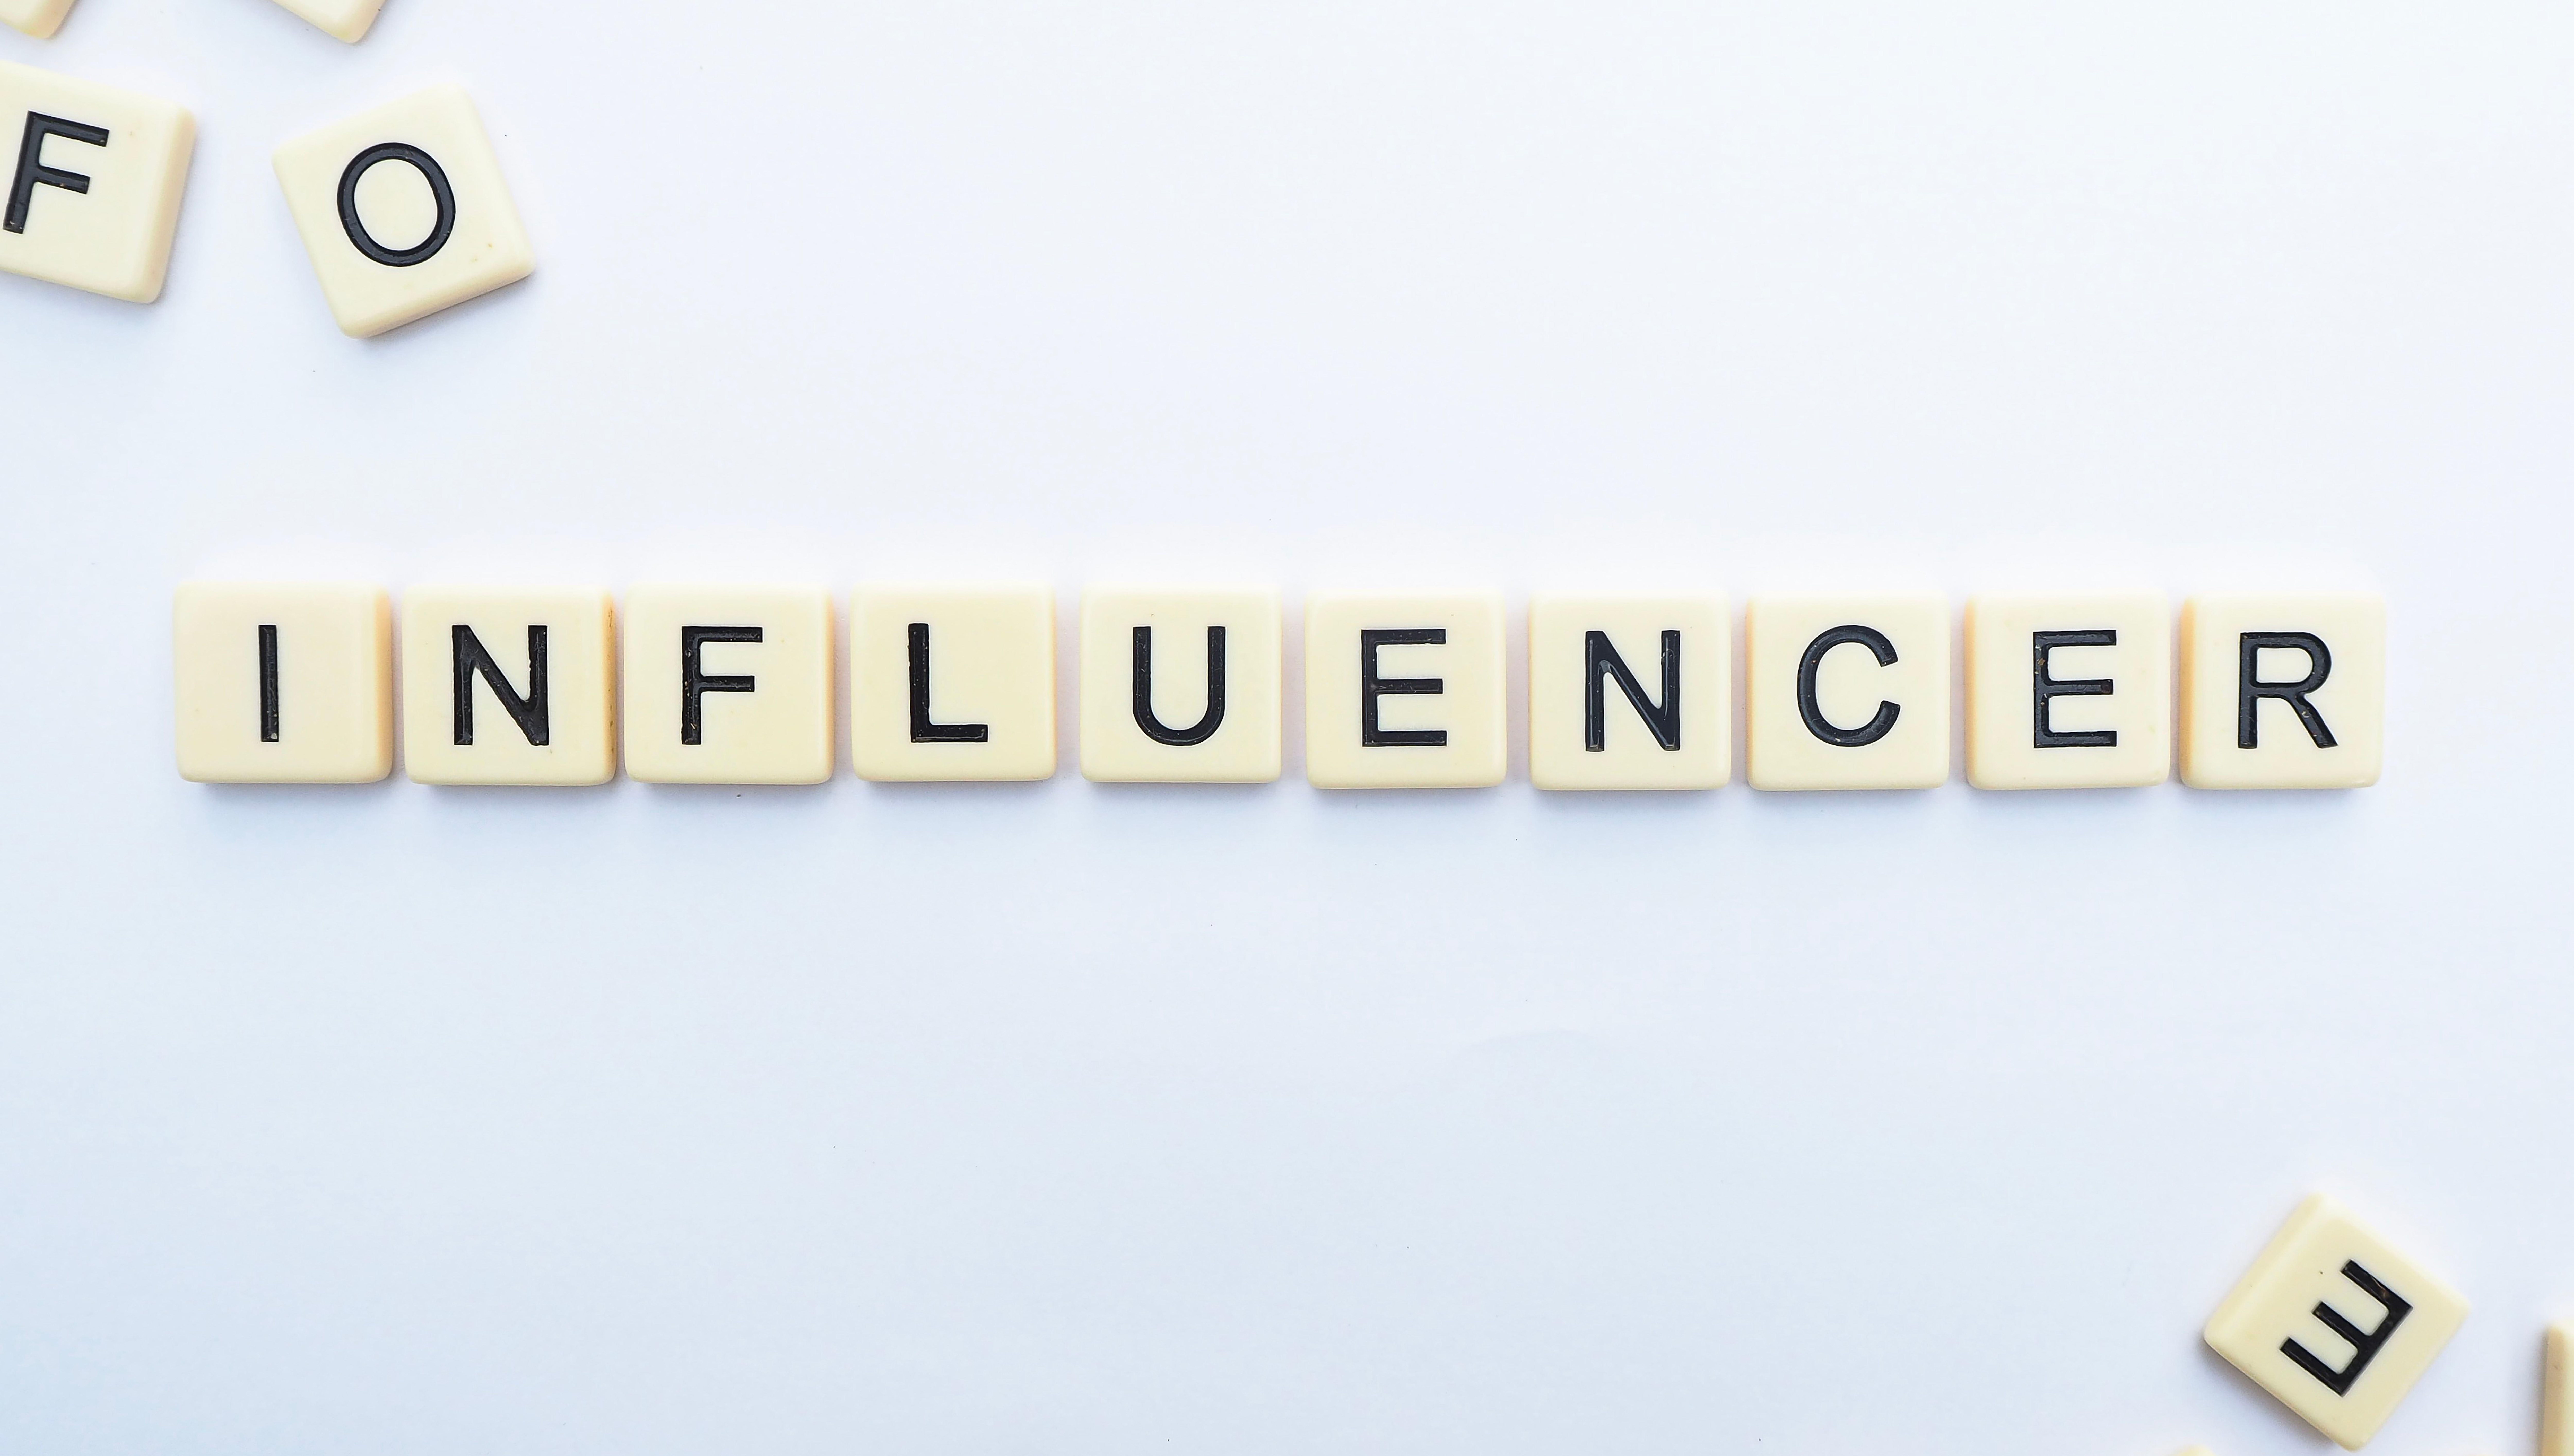 Scrabble-style letters arranged to spell the word 'Influencer'.